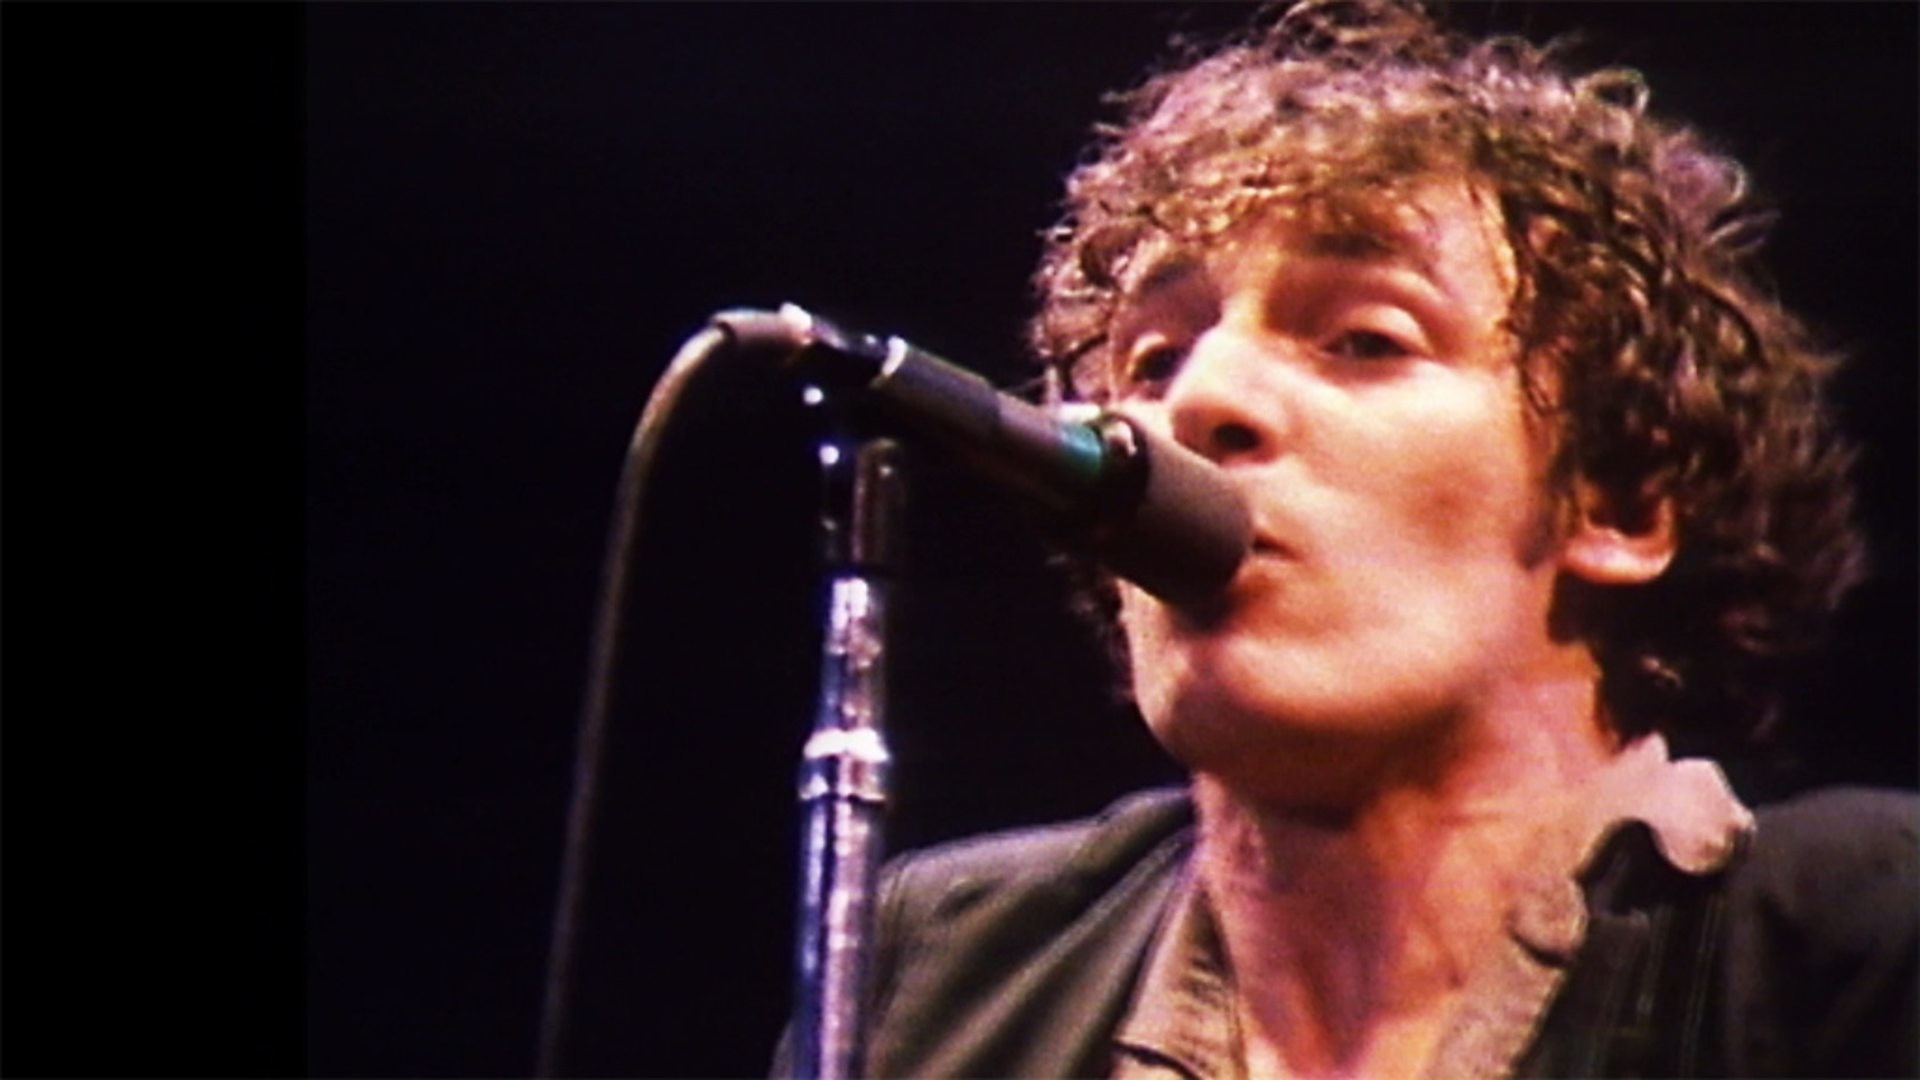 1920x1080 BBC Arts - BBC Arts, Bruce Springsteen and the E Street Band live in 1978